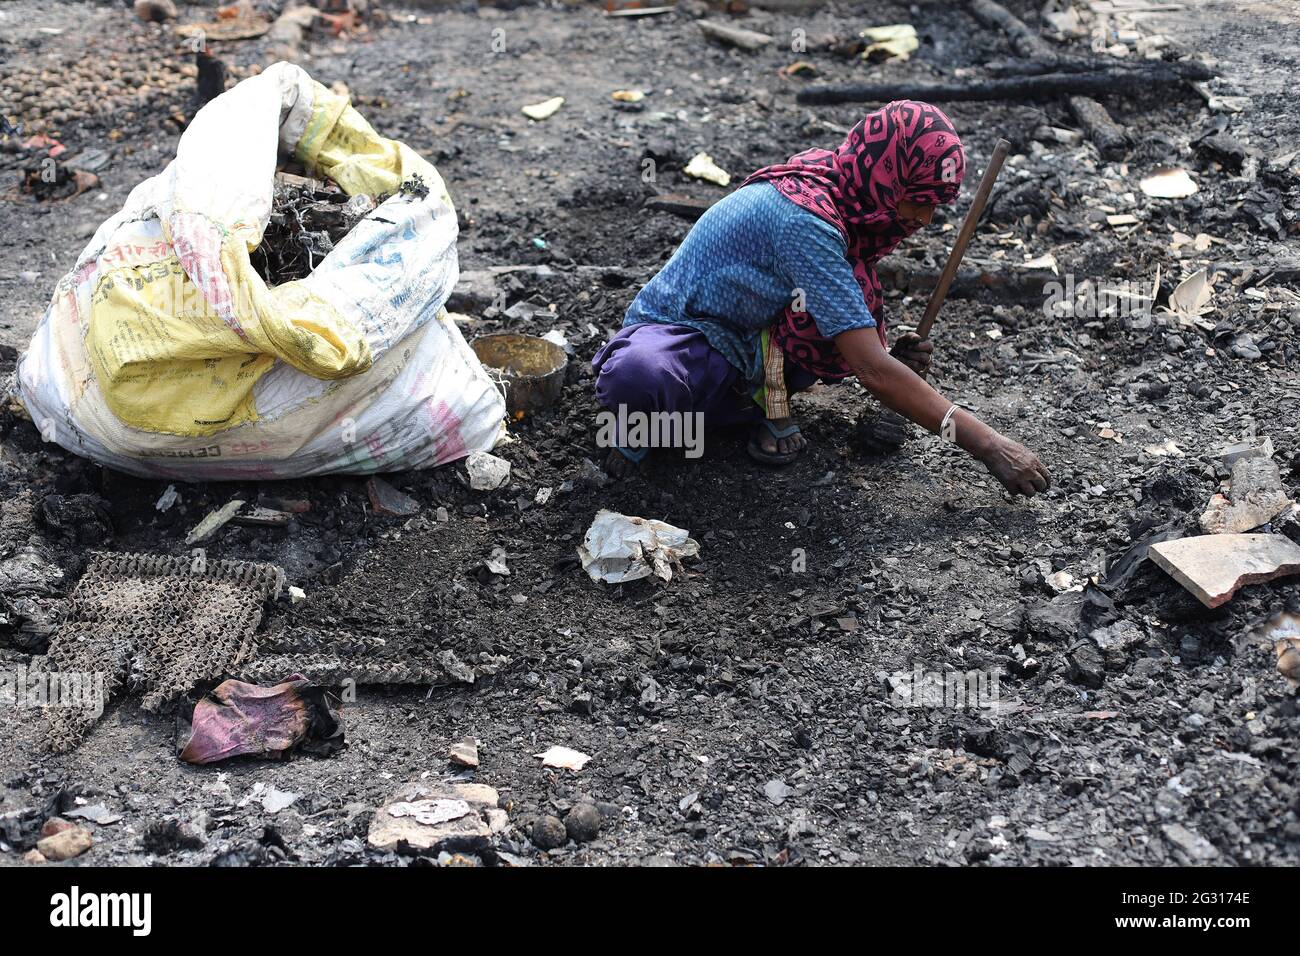 New Delhi, India. 13th June, 2021. A Rohingya refugee looks for her belongings amid the charred remains of their camp, during the aftermath.A fire incident broke out at the Rohingya refugee camp leaving over 50 shanties of Rohingya refugees gutted. The cause of the fire has not yet been established. (Photo by Amarjeet Kumar Singh/SOPA Imag/Sipa USA) Credit: Sipa USA/Alamy Live News Stock Photo